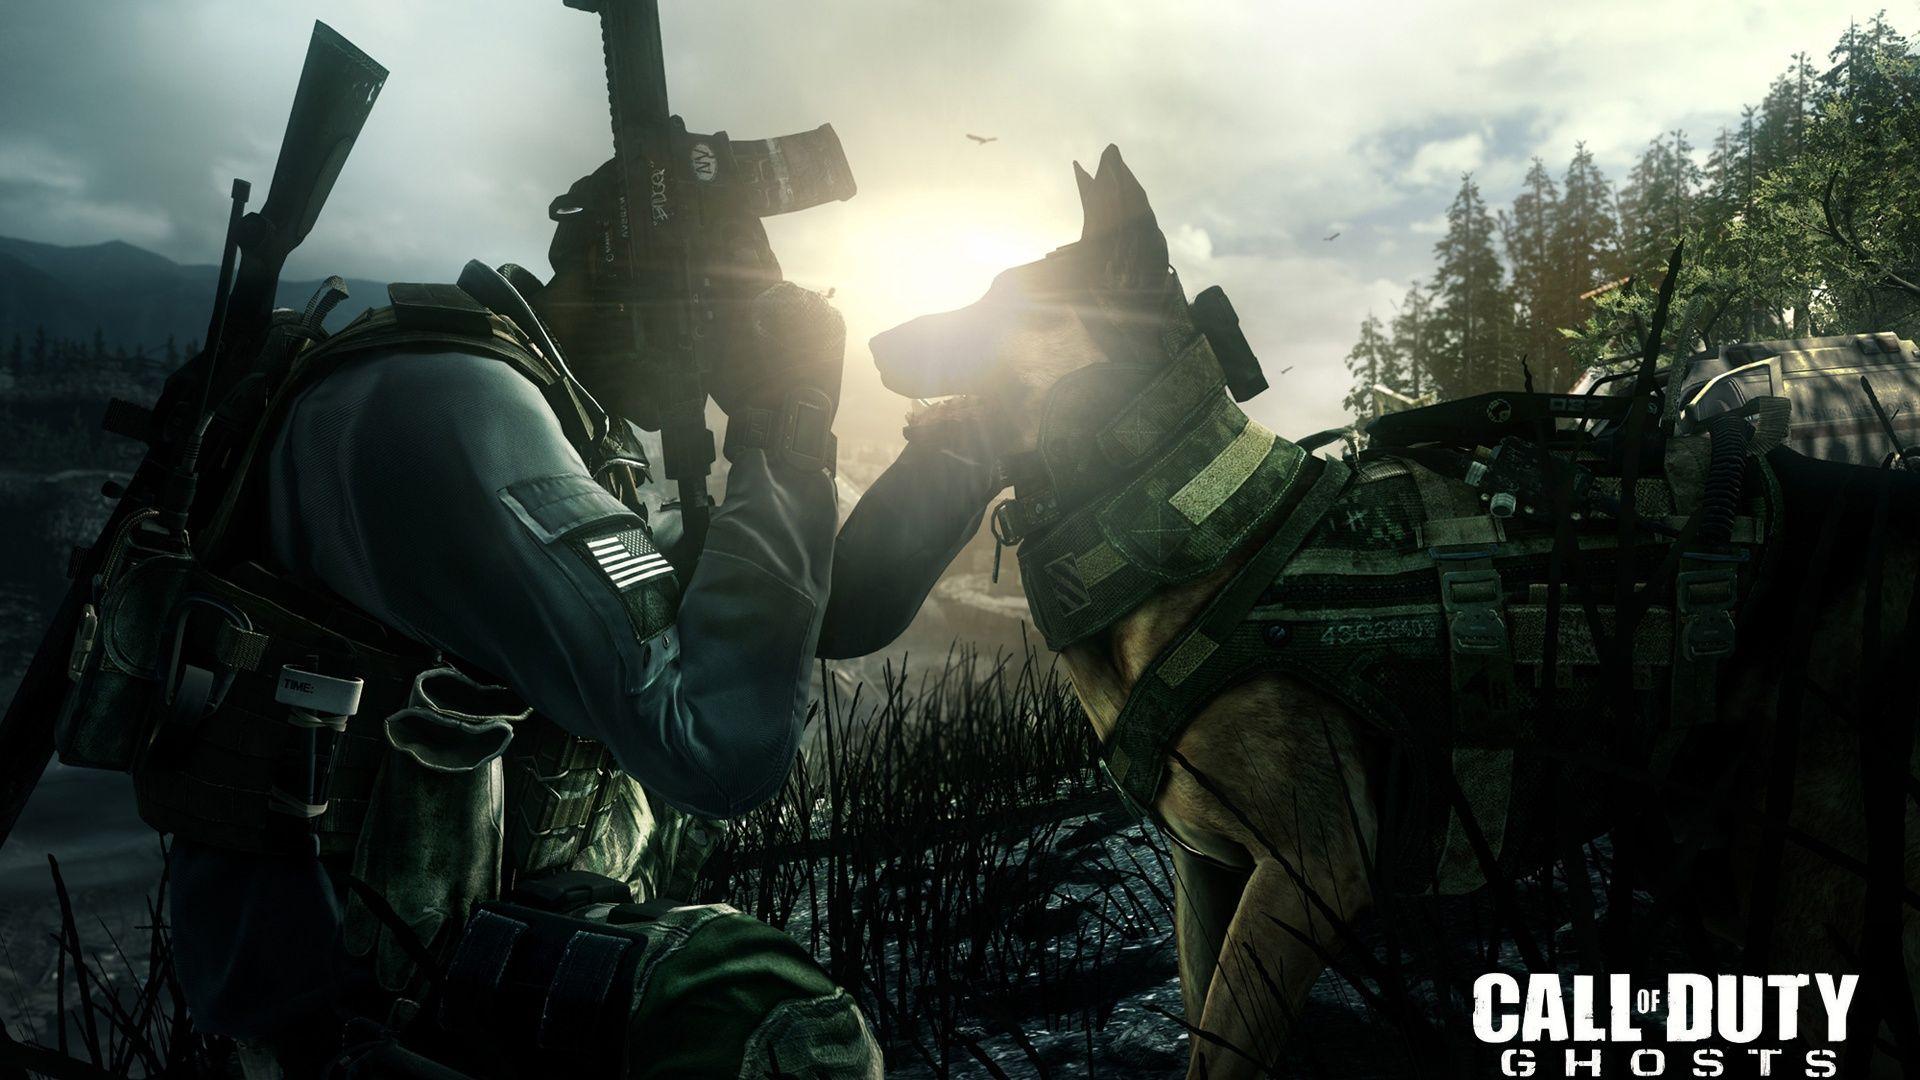 Hd Wallpaper Call Of Duty Ghosts